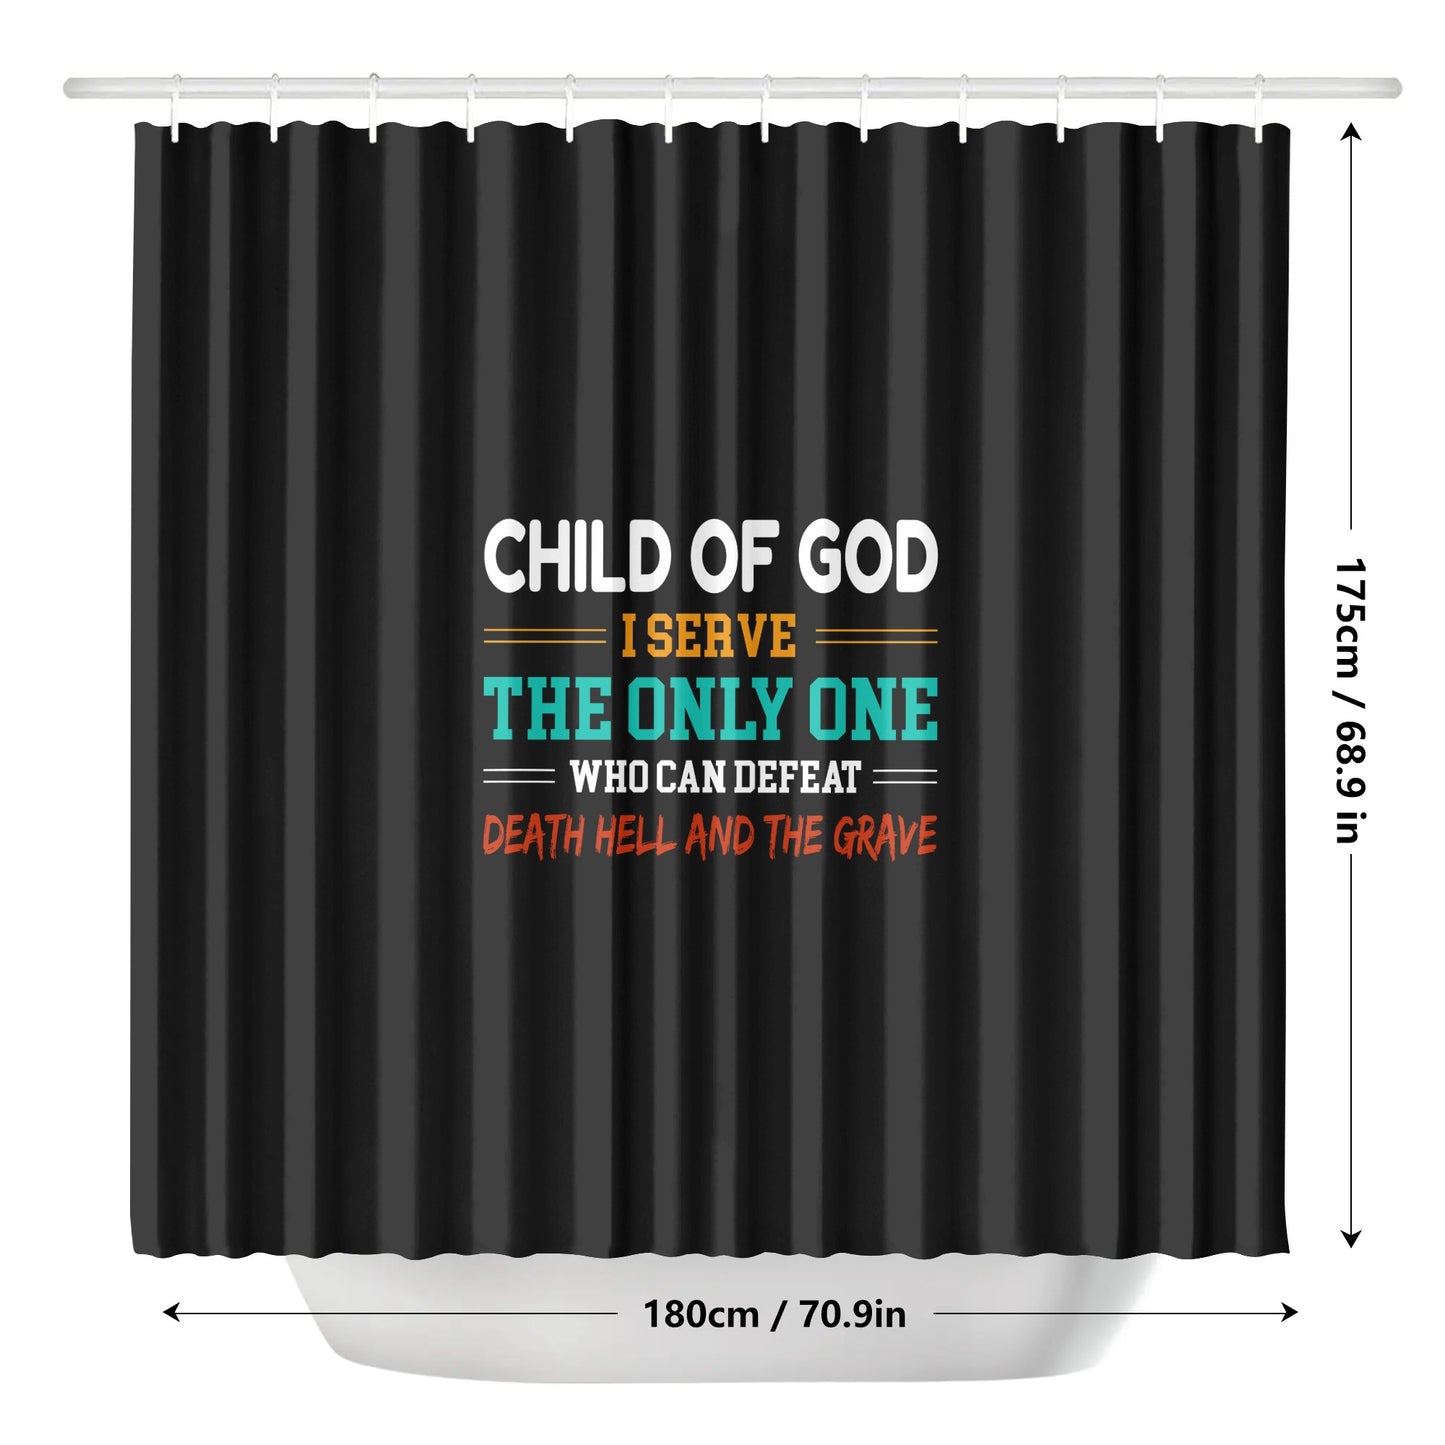 Child Of God I Serve The Only One Who Can Defeat Death Hell And The Grave Christian Shower Curtain popcustoms